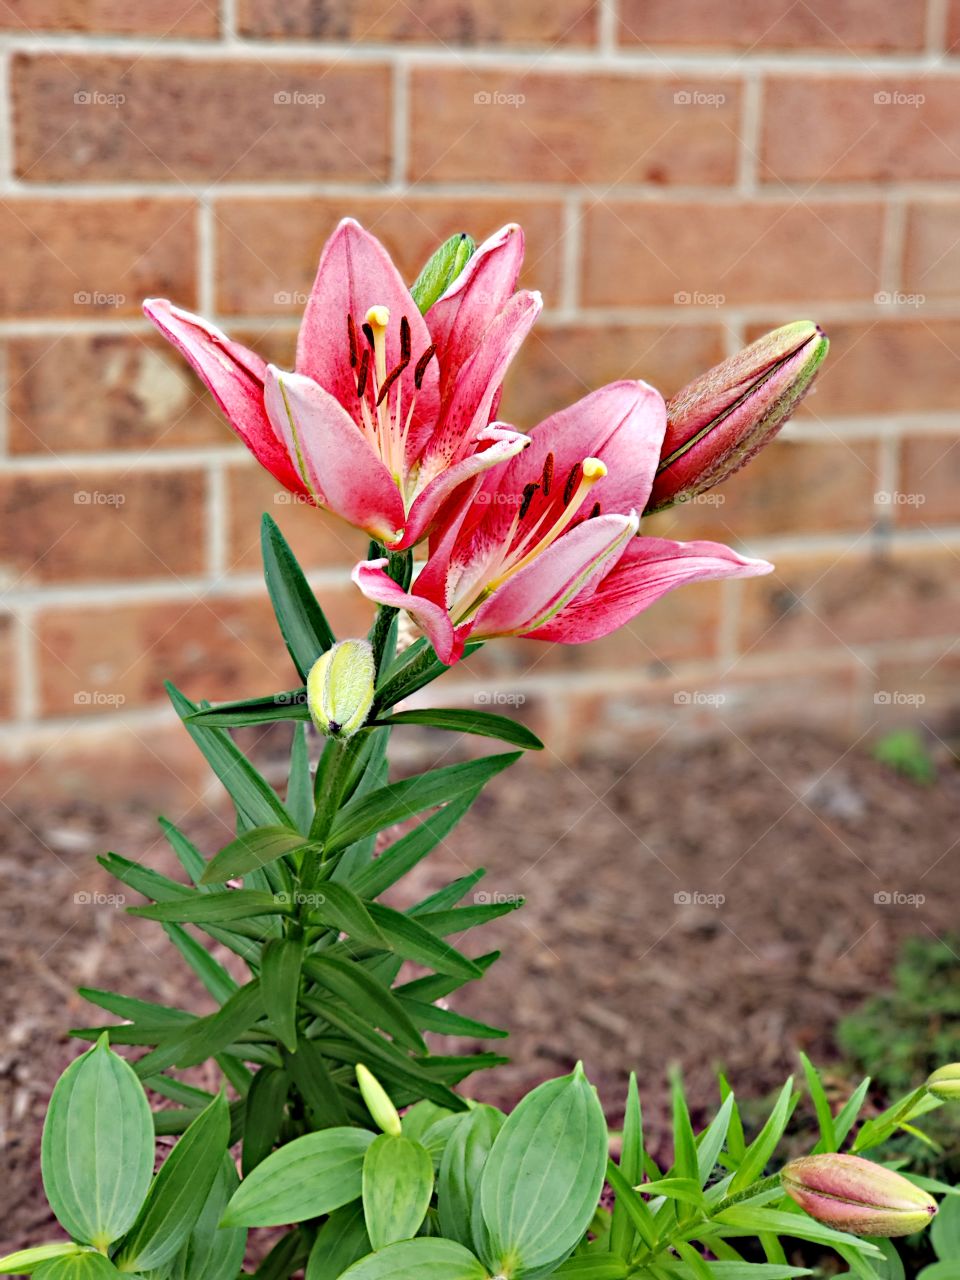 Lilies - red & white